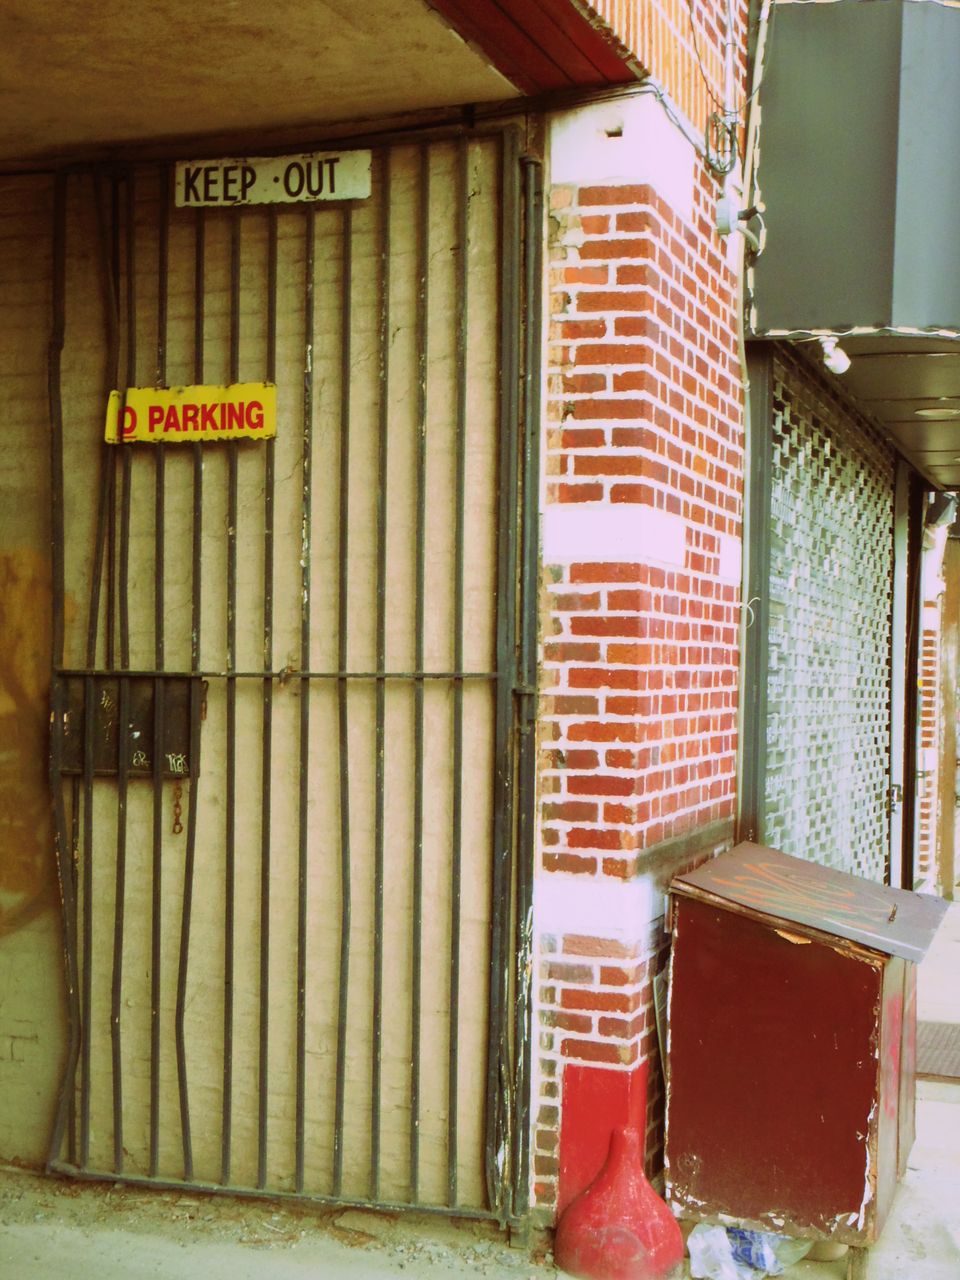 Photo of an open, black barred gate next to a brick wall. Attached signs read "No Parking" and "Keep Out"